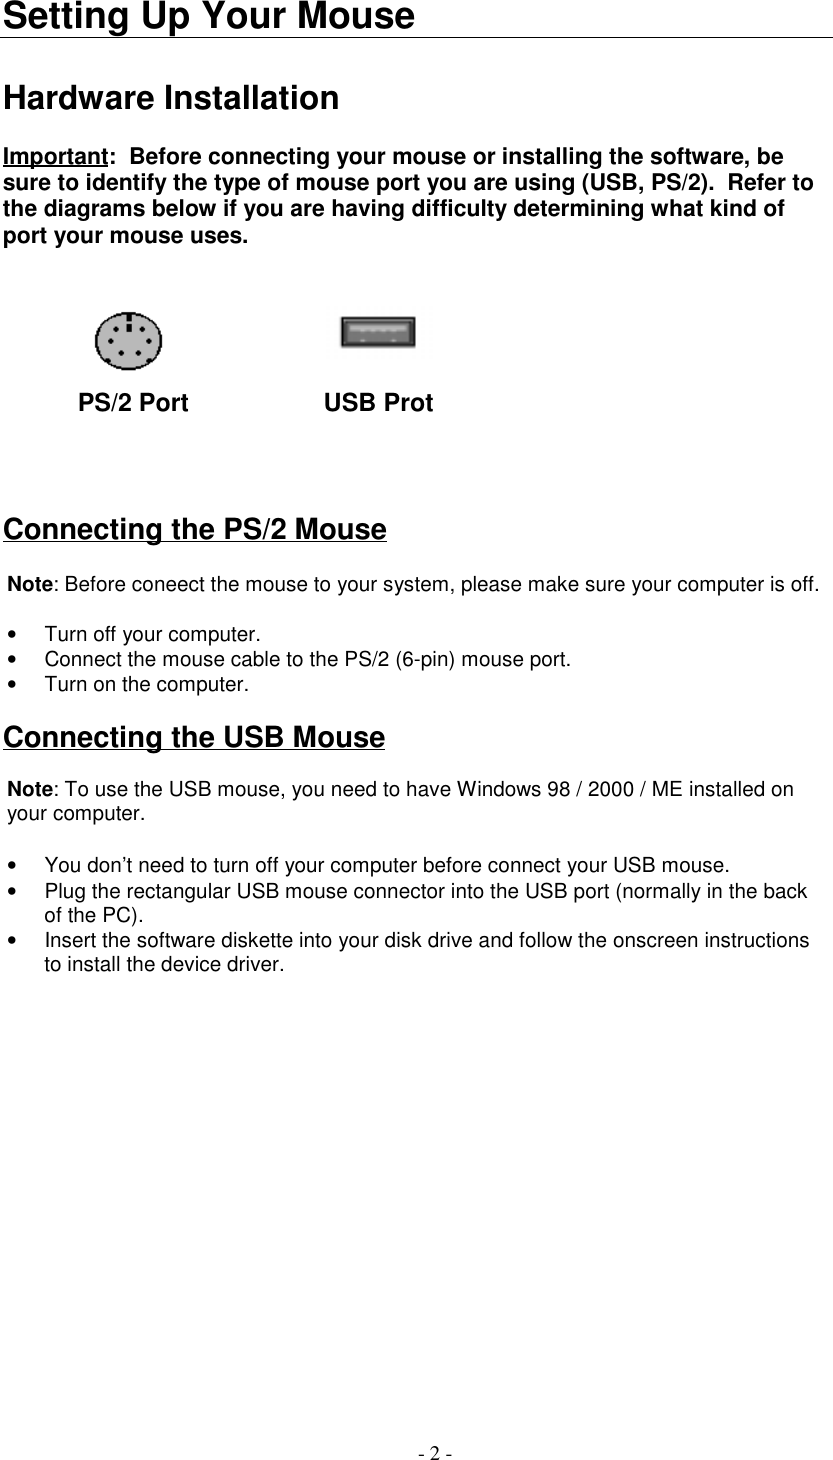 - 2 -Setting Up Your MouseHardware InstallationImportant:  Before connecting your mouse or installing the software, besure to identify the type of mouse port you are using (USB, PS/2).  Refer tothe diagrams below if you are having difficulty determining what kind ofport your mouse uses.         PS/2 Port            USB ProtConnecting the PS/2 MouseNote: Before coneect the mouse to your system, please make sure your computer is off.•  Turn off your computer.•  Connect the mouse cable to the PS/2 (6-pin) mouse port.•  Turn on the computer.  Connecting the USB MouseNote: To use the USB mouse, you need to have Windows 98 / 2000 / ME installed onyour computer.•  You don’t need to turn off your computer before connect your USB mouse.•  Plug the rectangular USB mouse connector into the USB port (normally in the backof the PC).•  Insert the software diskette into your disk drive and follow the onscreen instructionsto install the device driver.